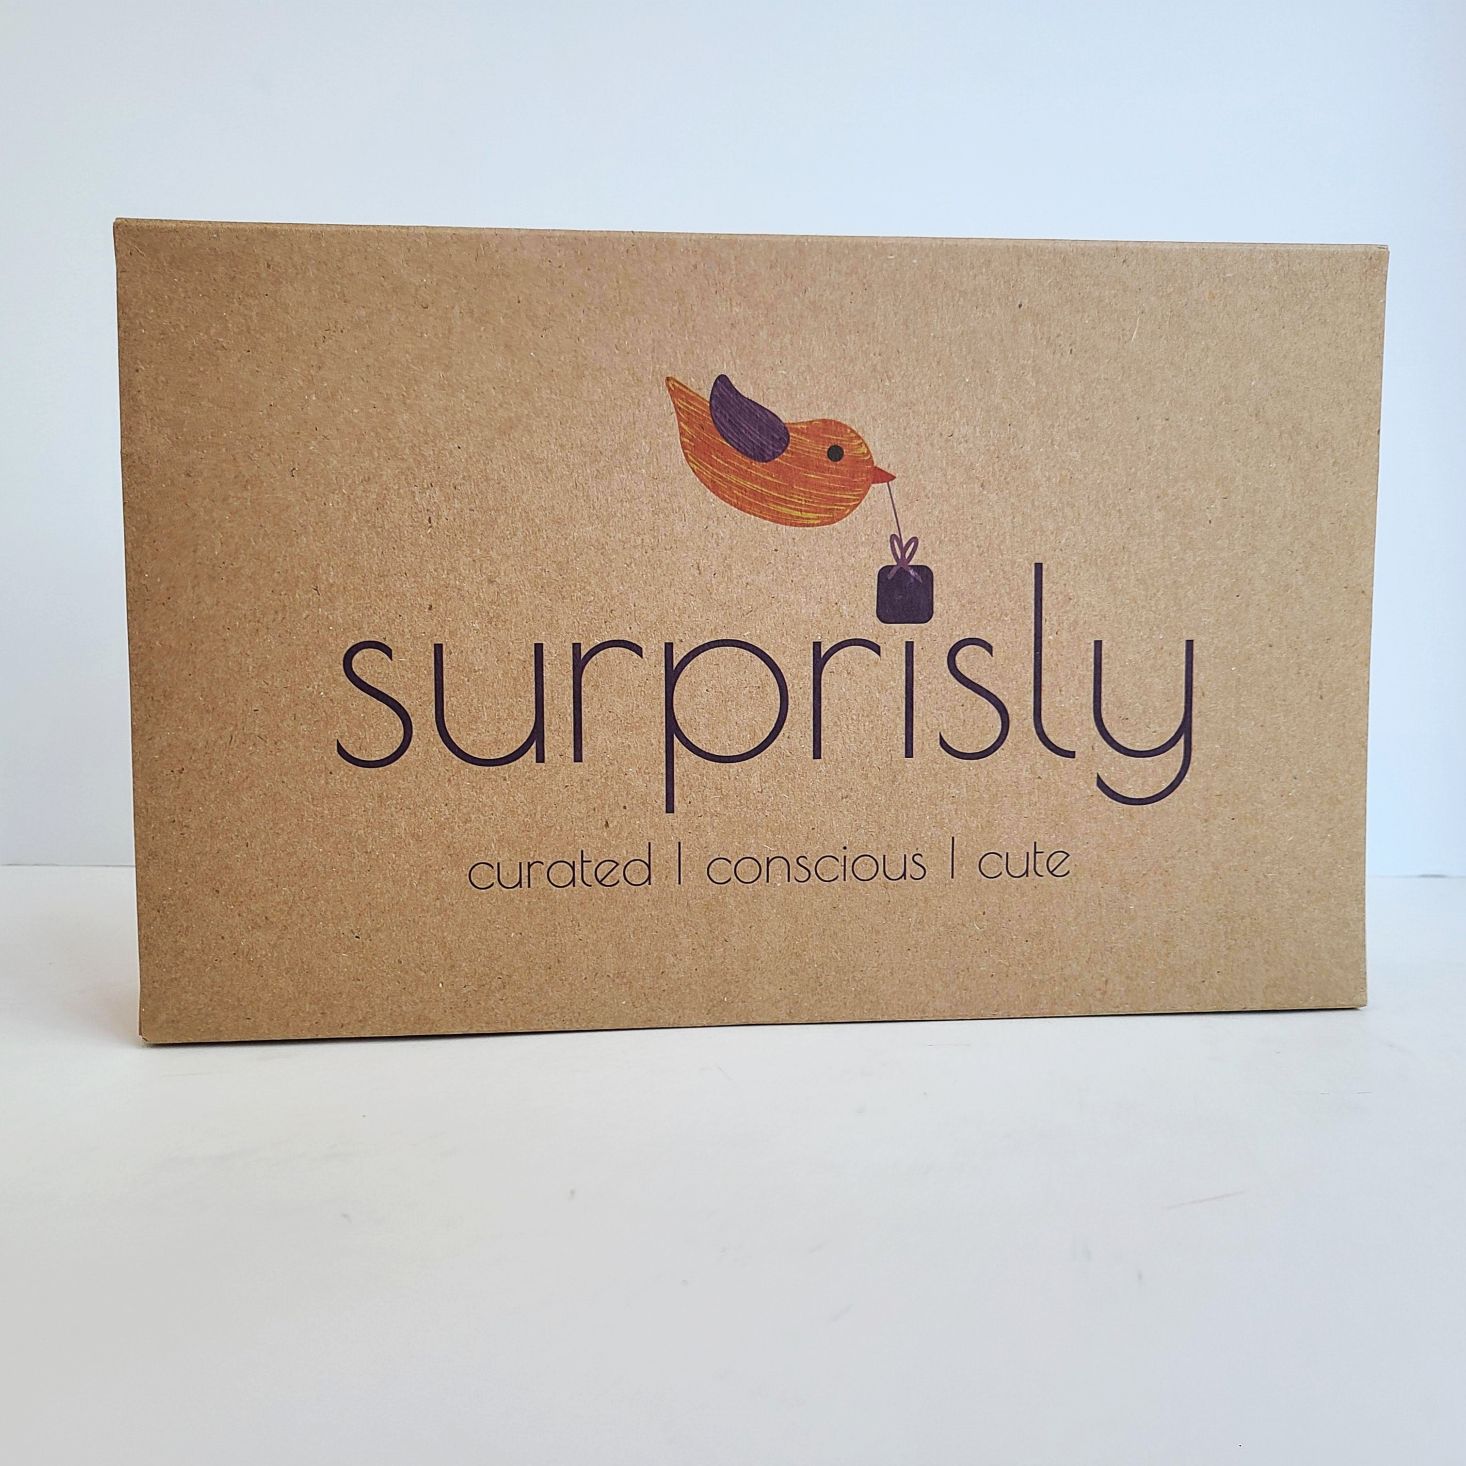 Surprisly Baby Clothing Subscription Box Review – August 2020